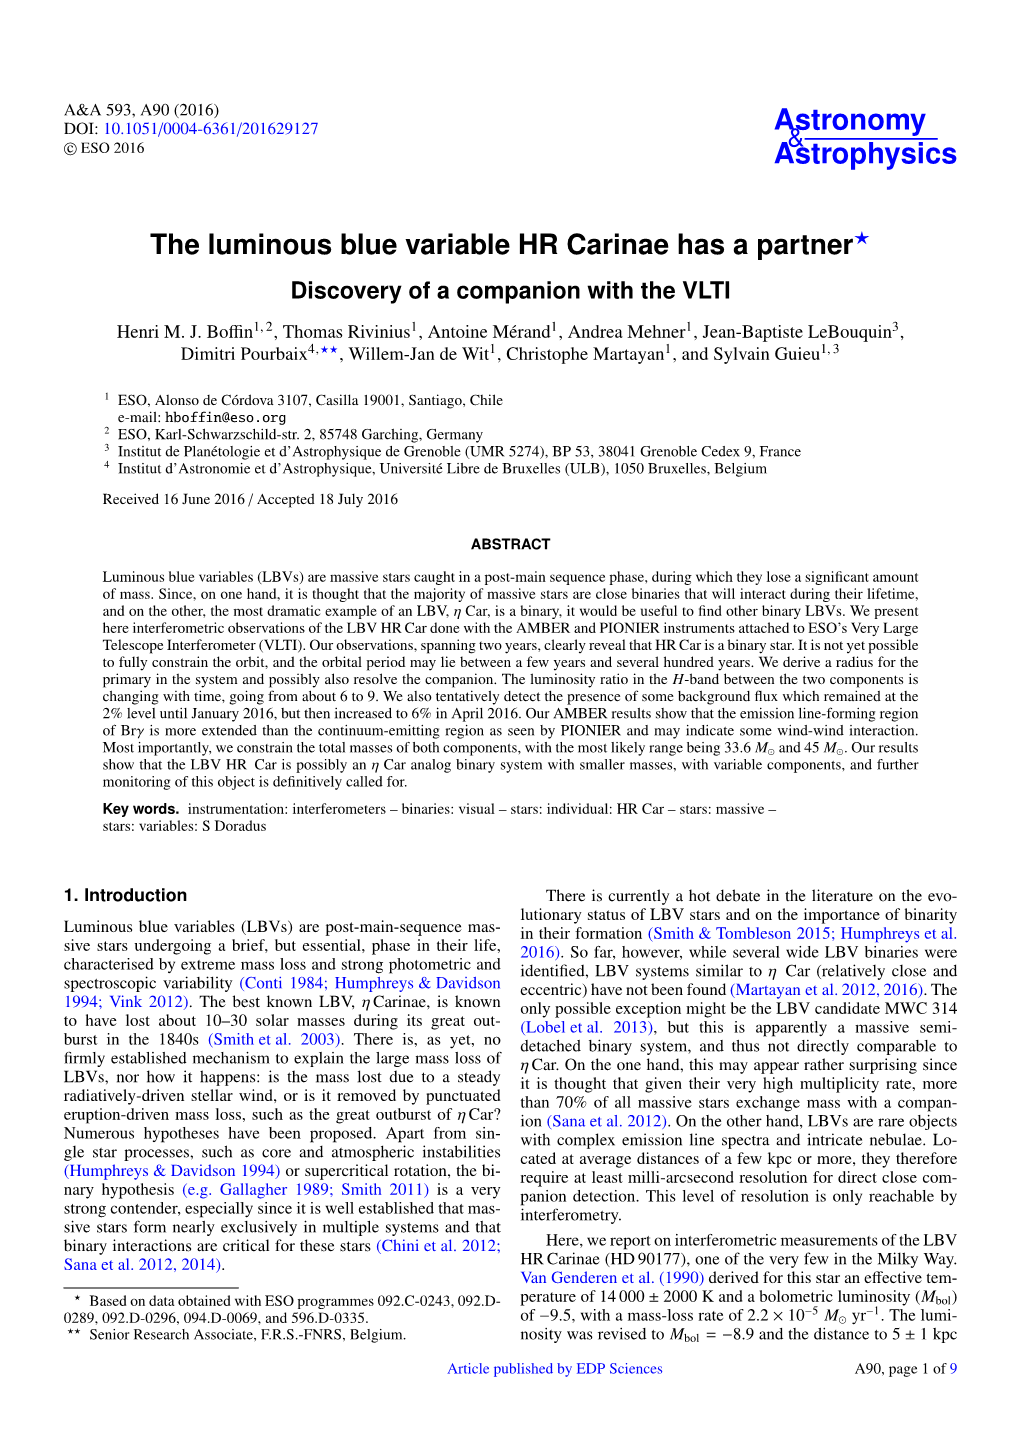 The Luminous Blue Variable HR Carinae Has a Partner? Discovery of a Companion with the VLTI